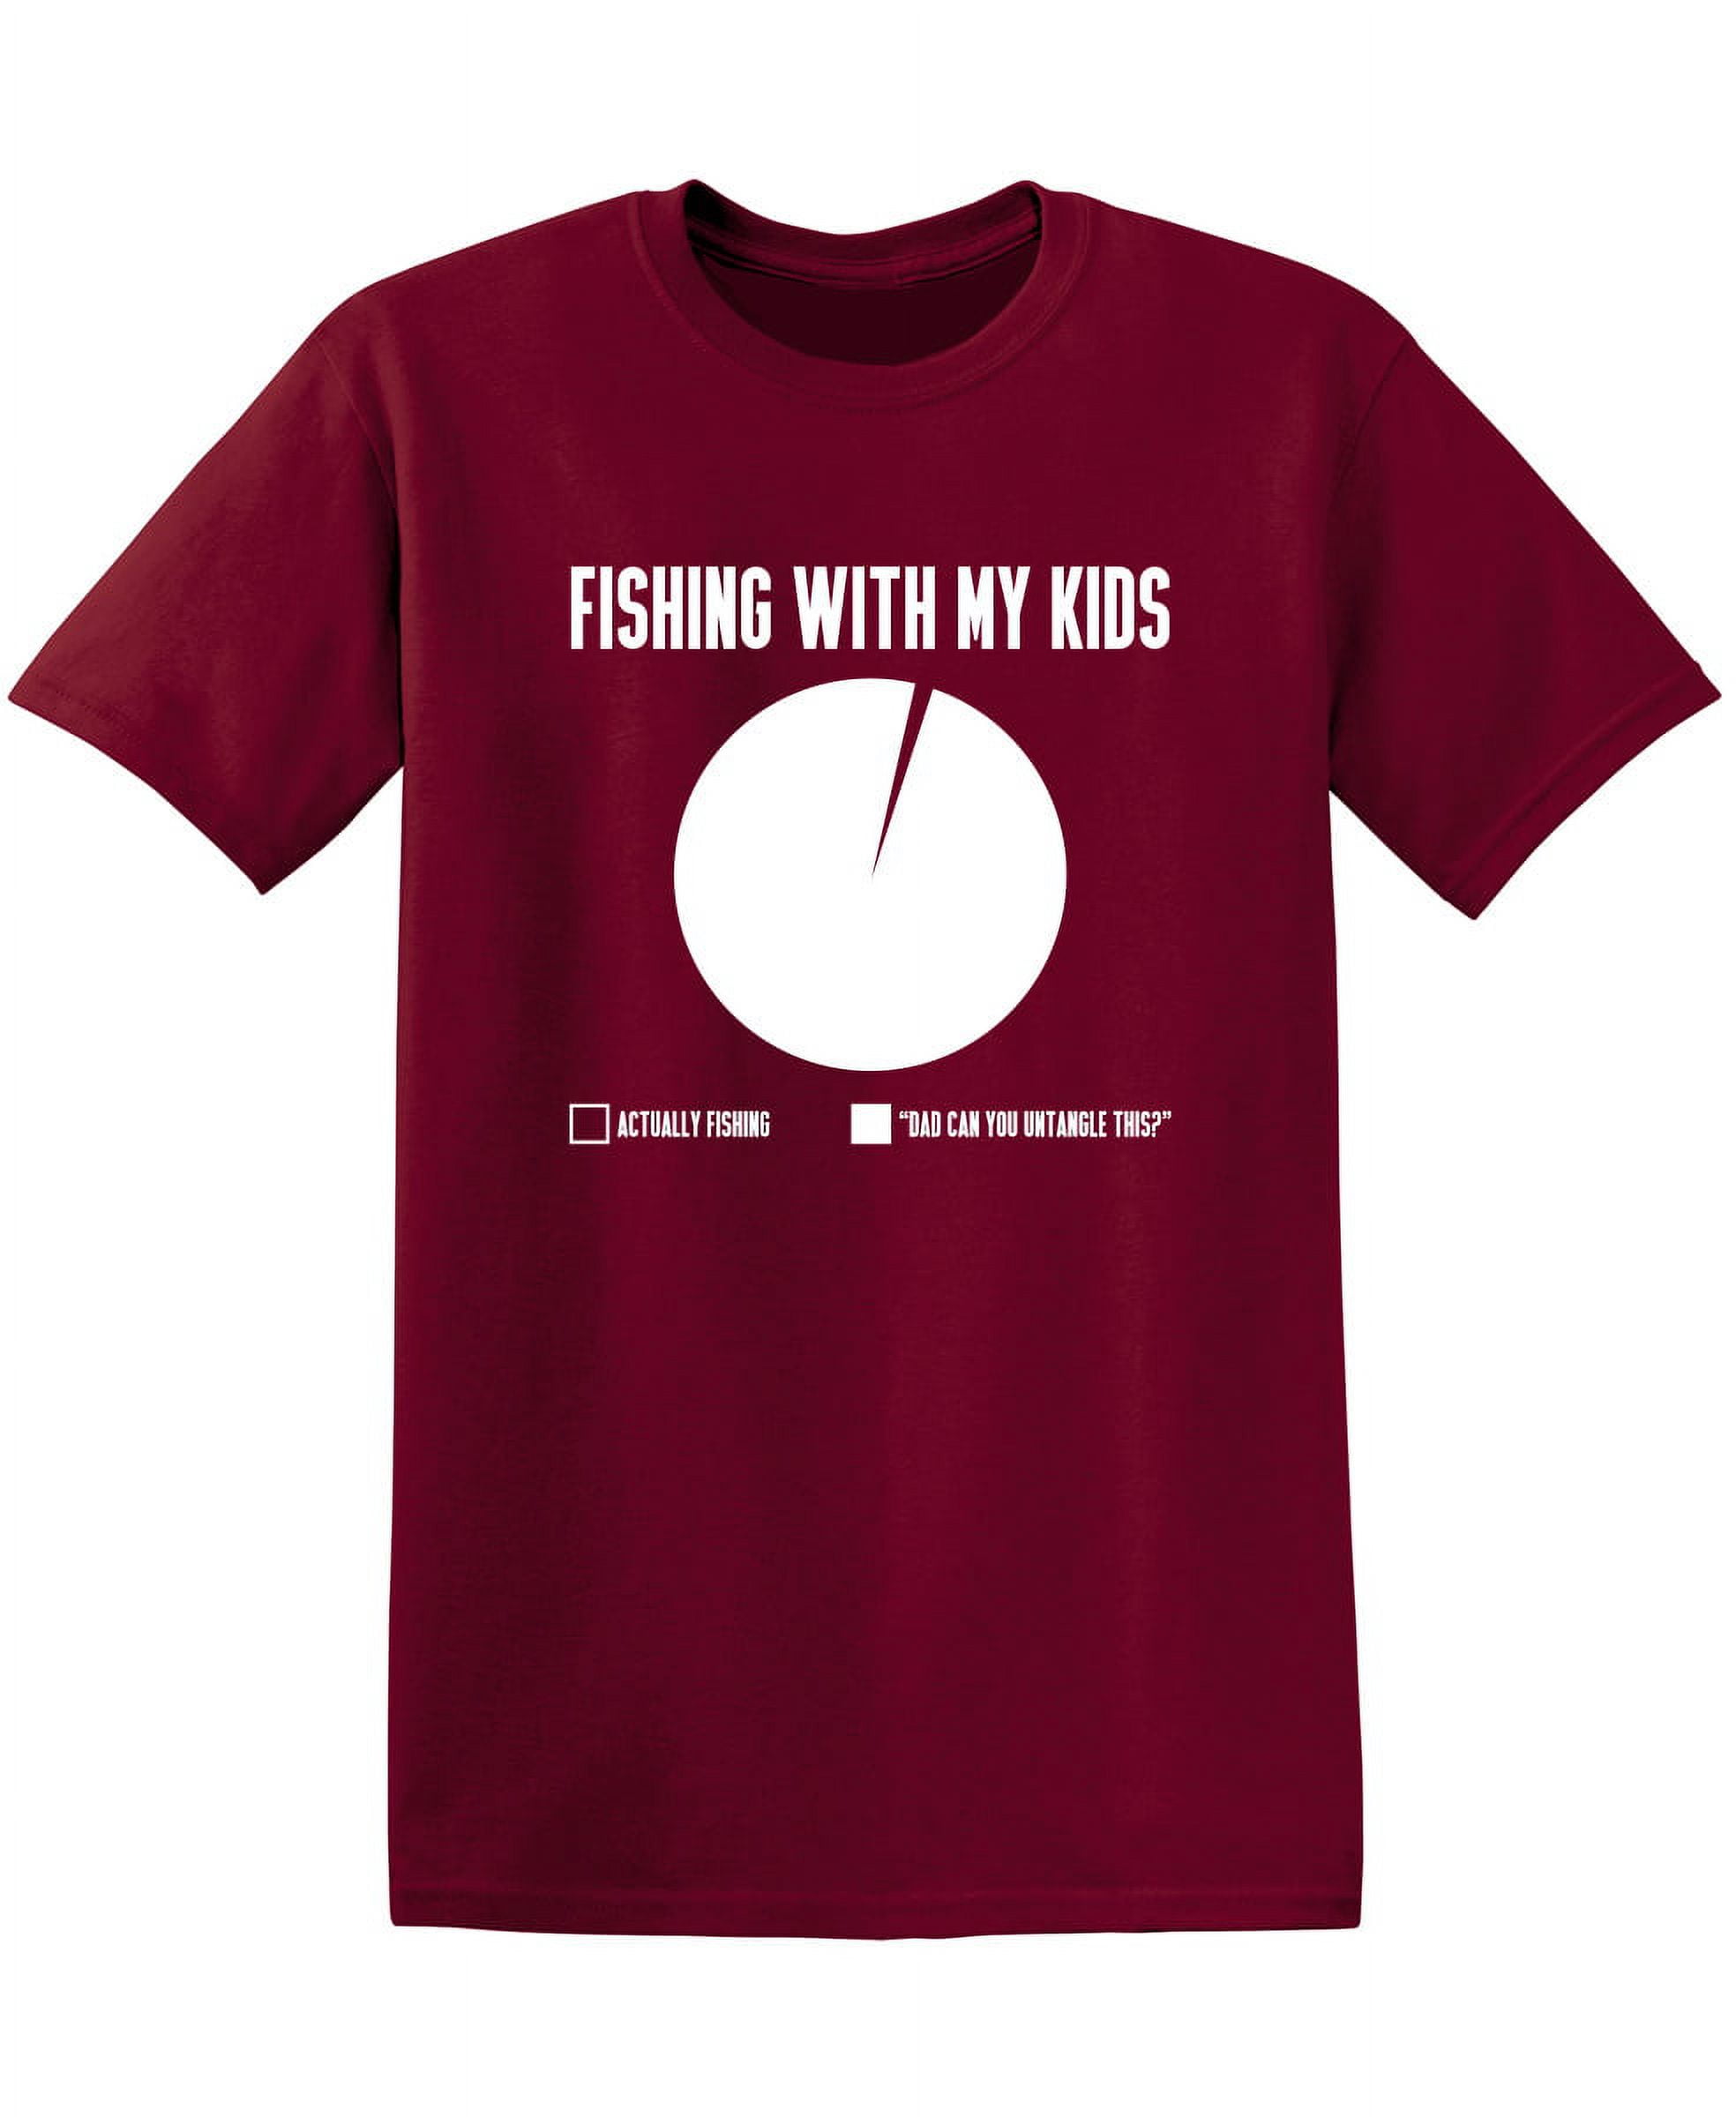 Fishing With My Kids Sarcastic Premium T Shirt Adult Humor Funny